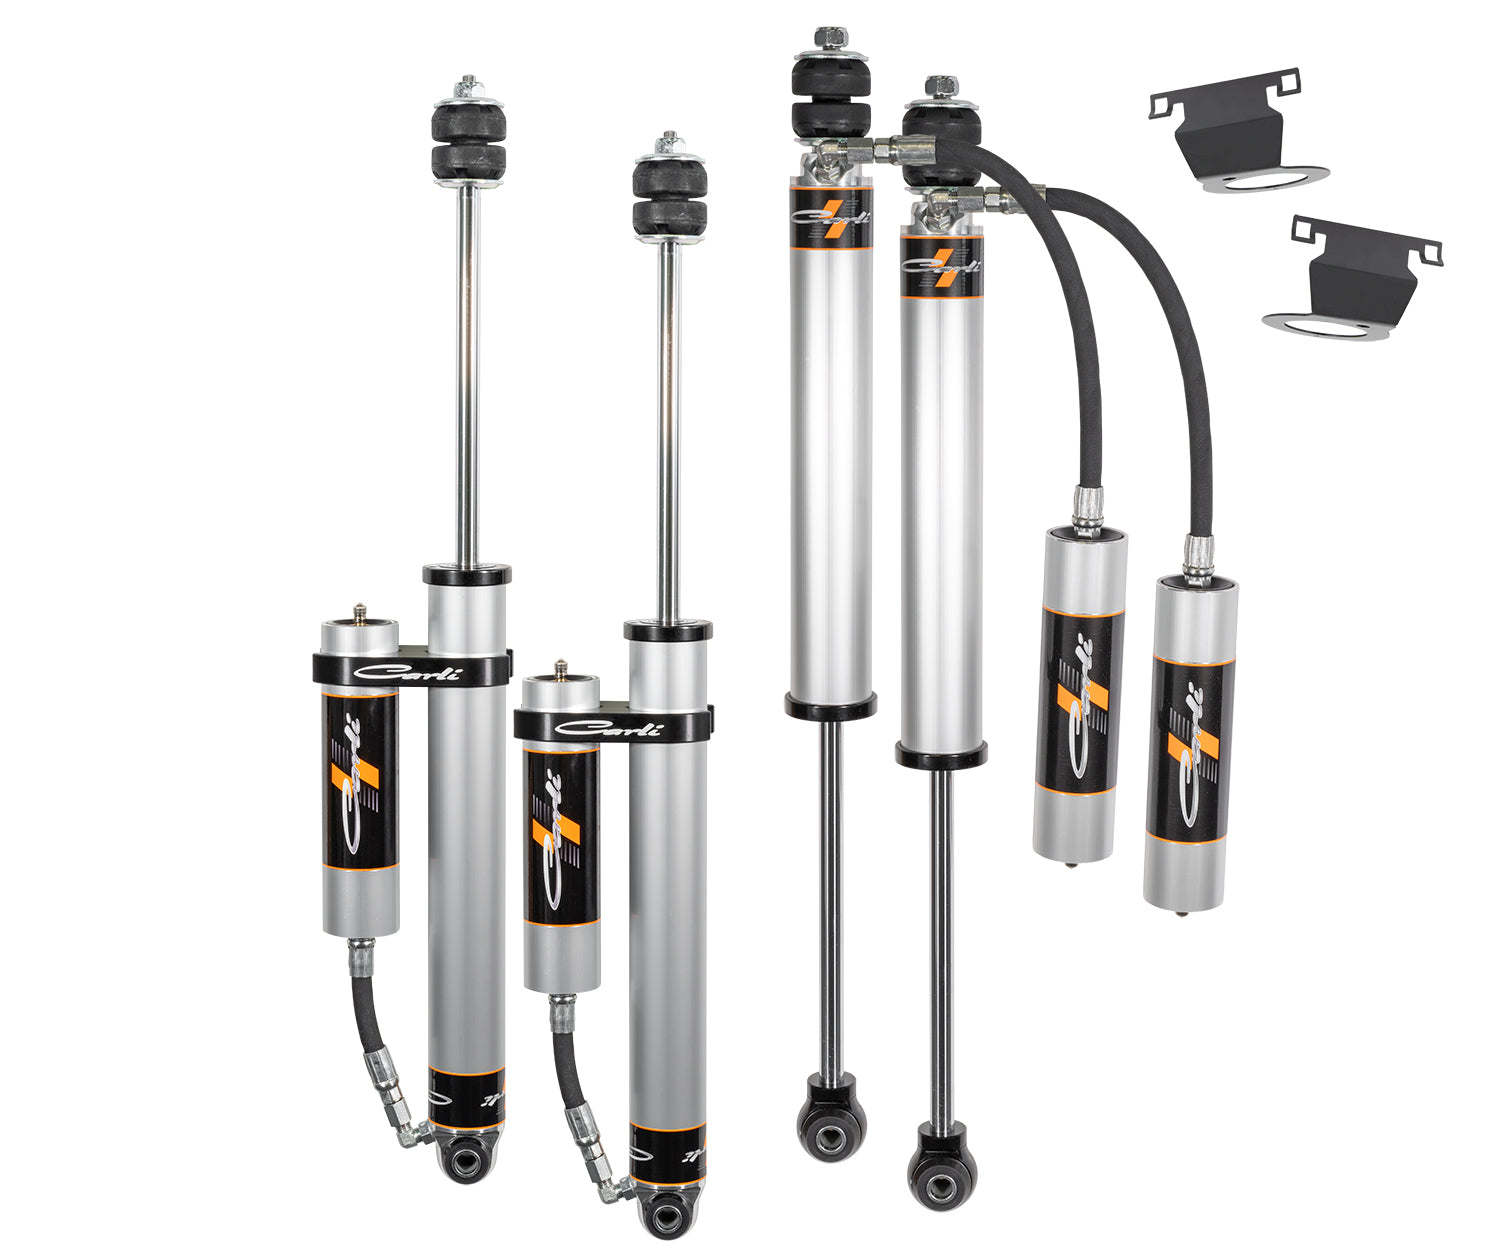 Carli Suspension 3" Backcountry Shock Package